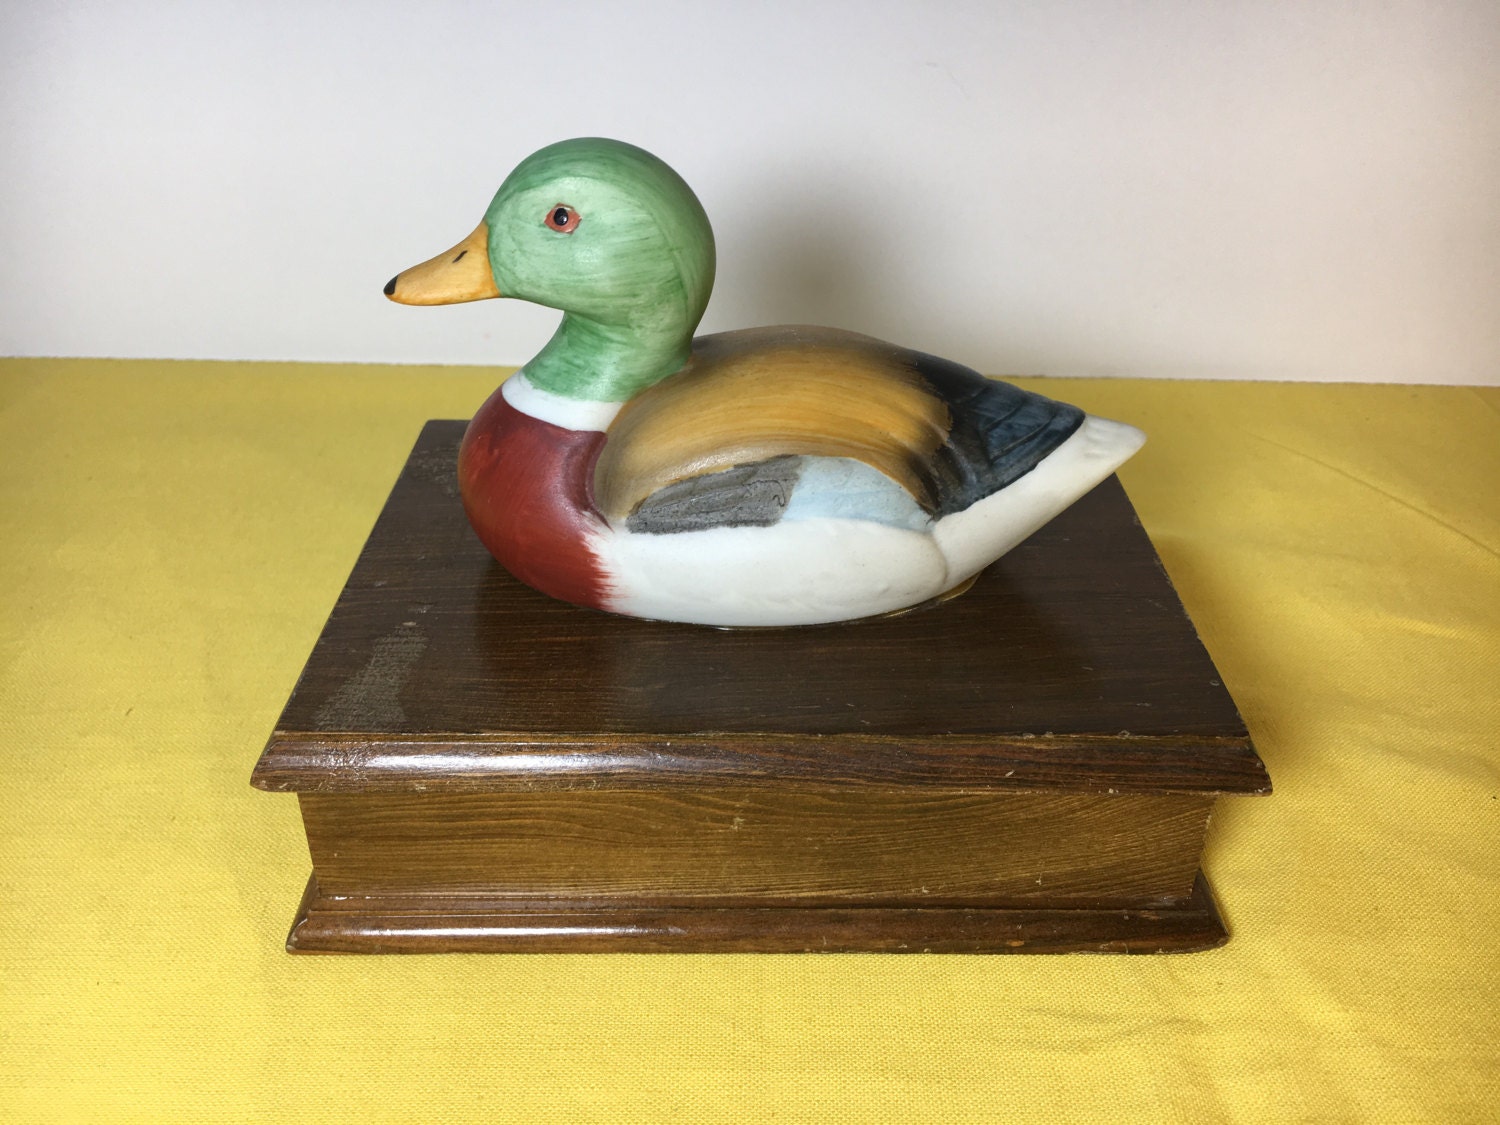 Vintage Mallard Duck Playing Cards, Ceramic Duck On Top Of Wooden Box, Two Sets of Playing Cards ...